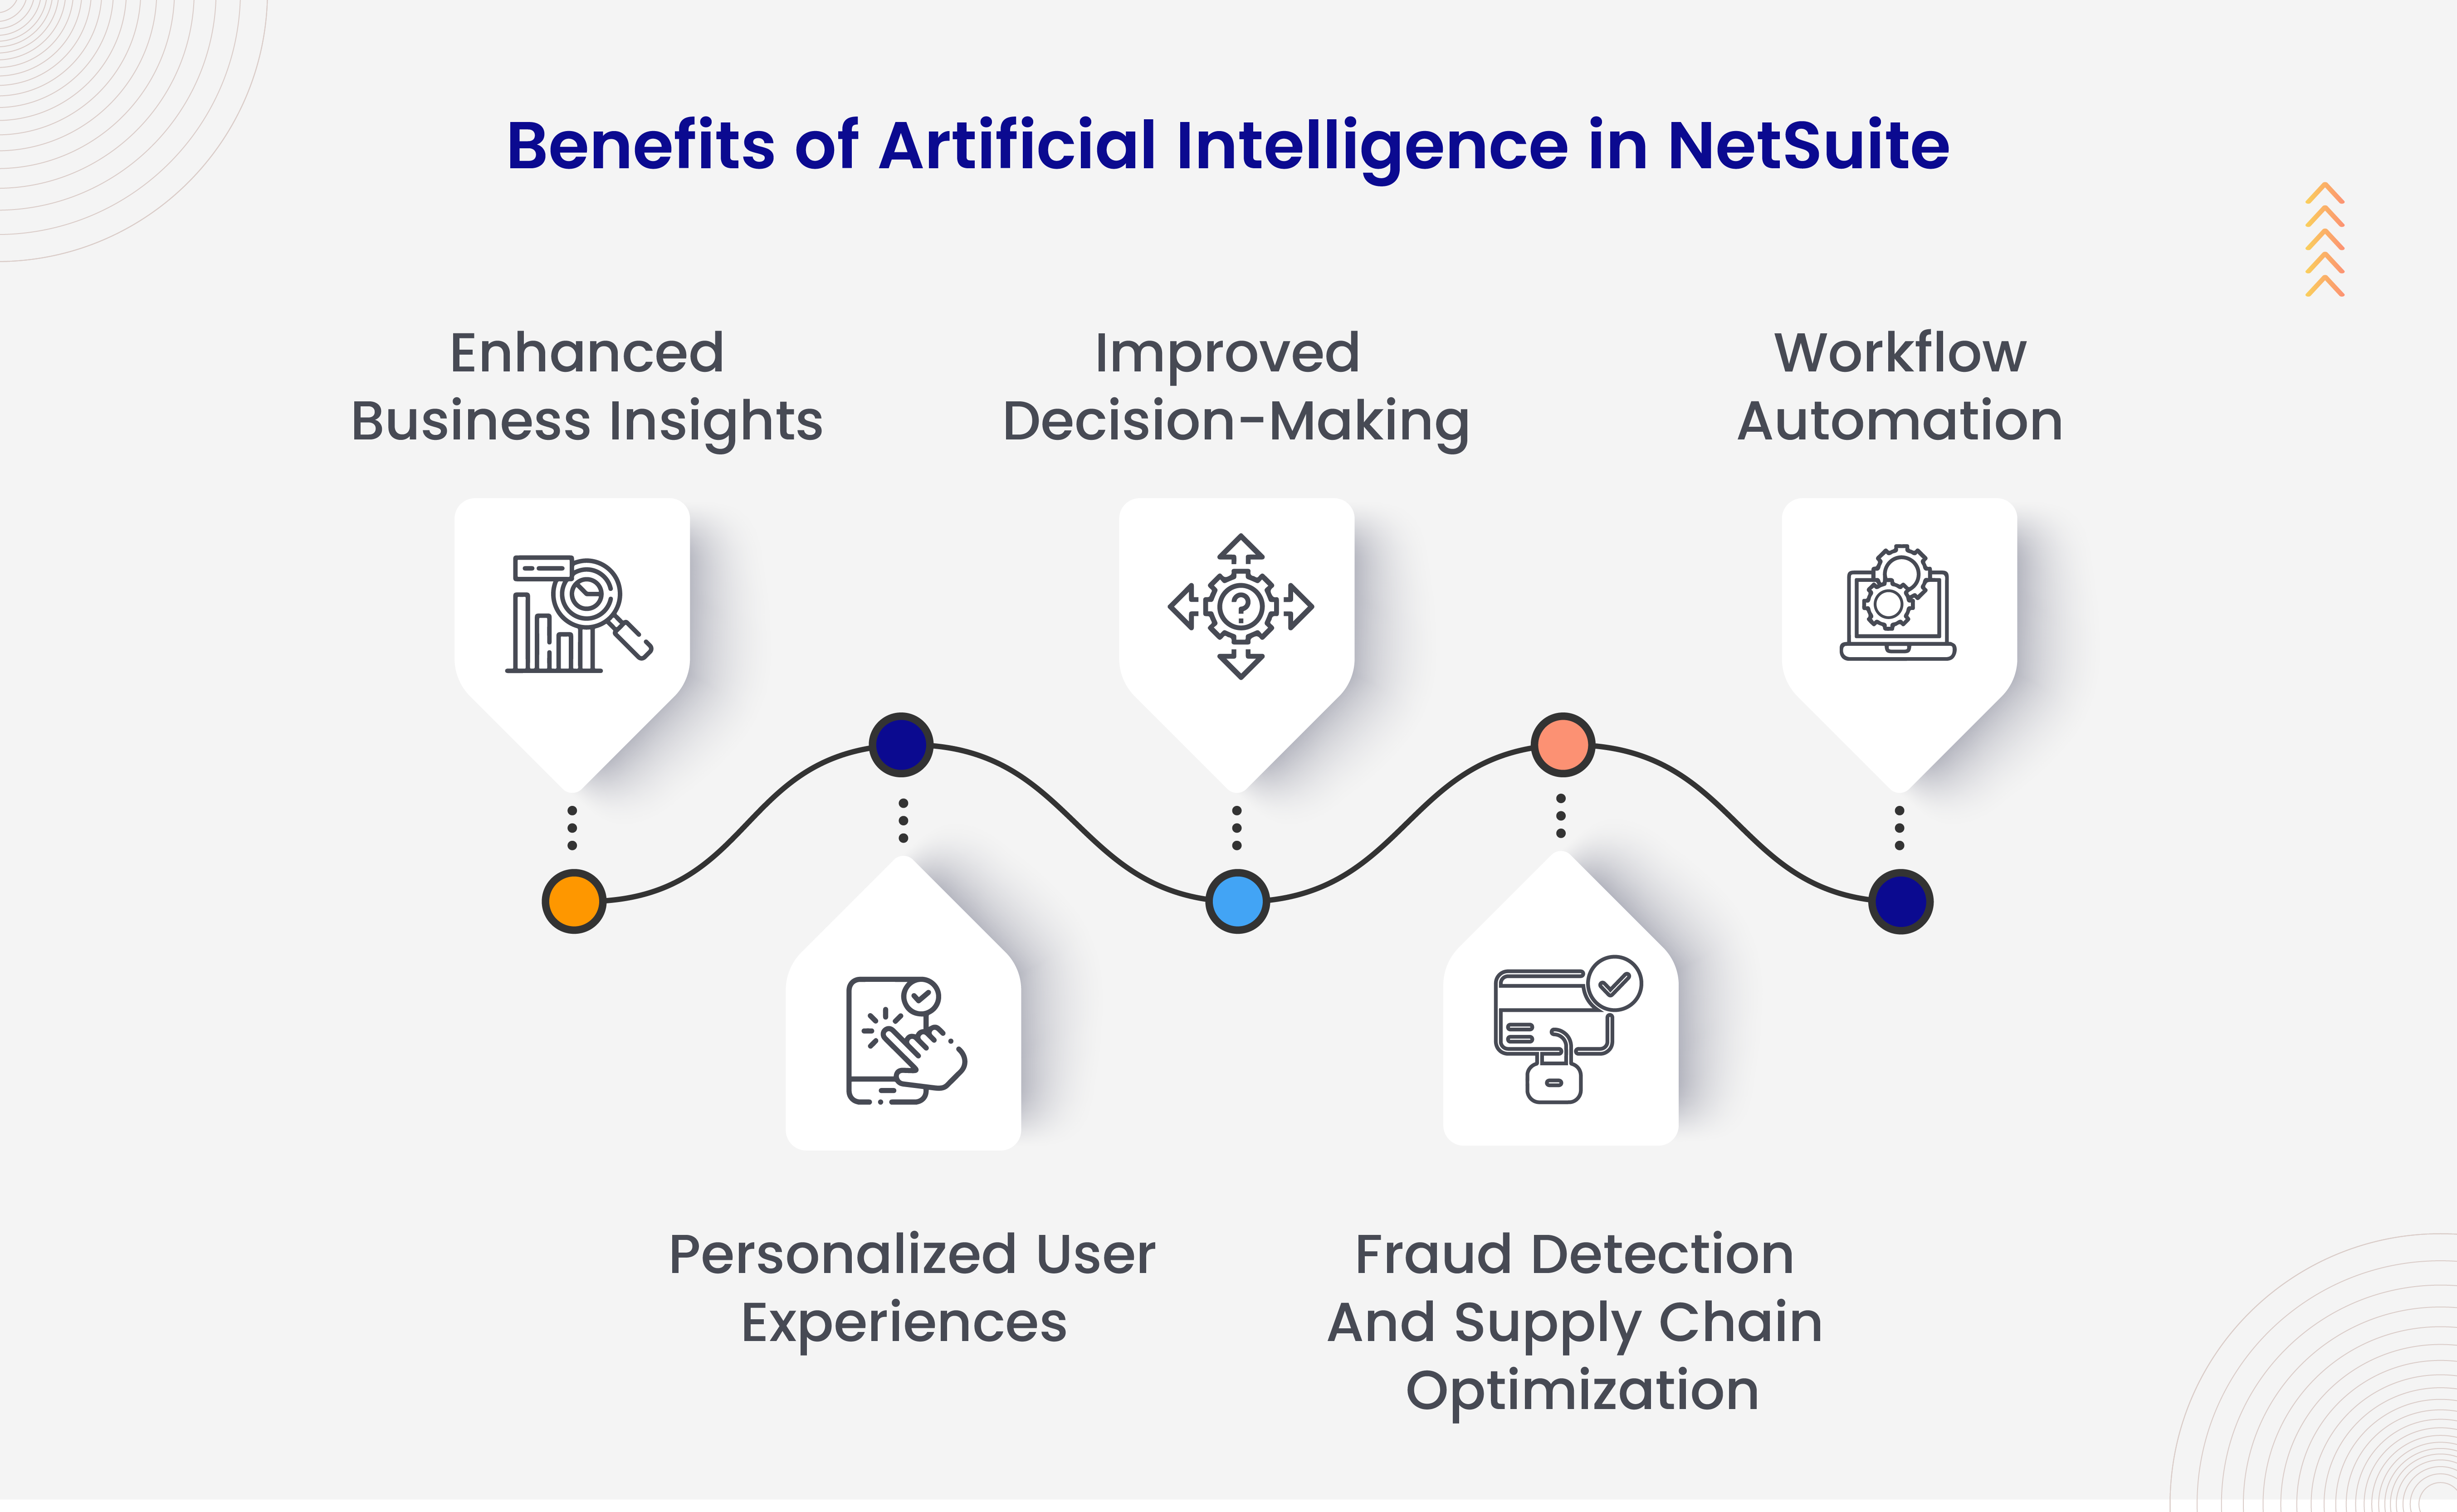 Benefits of Artificial Intelligence in NetSuite